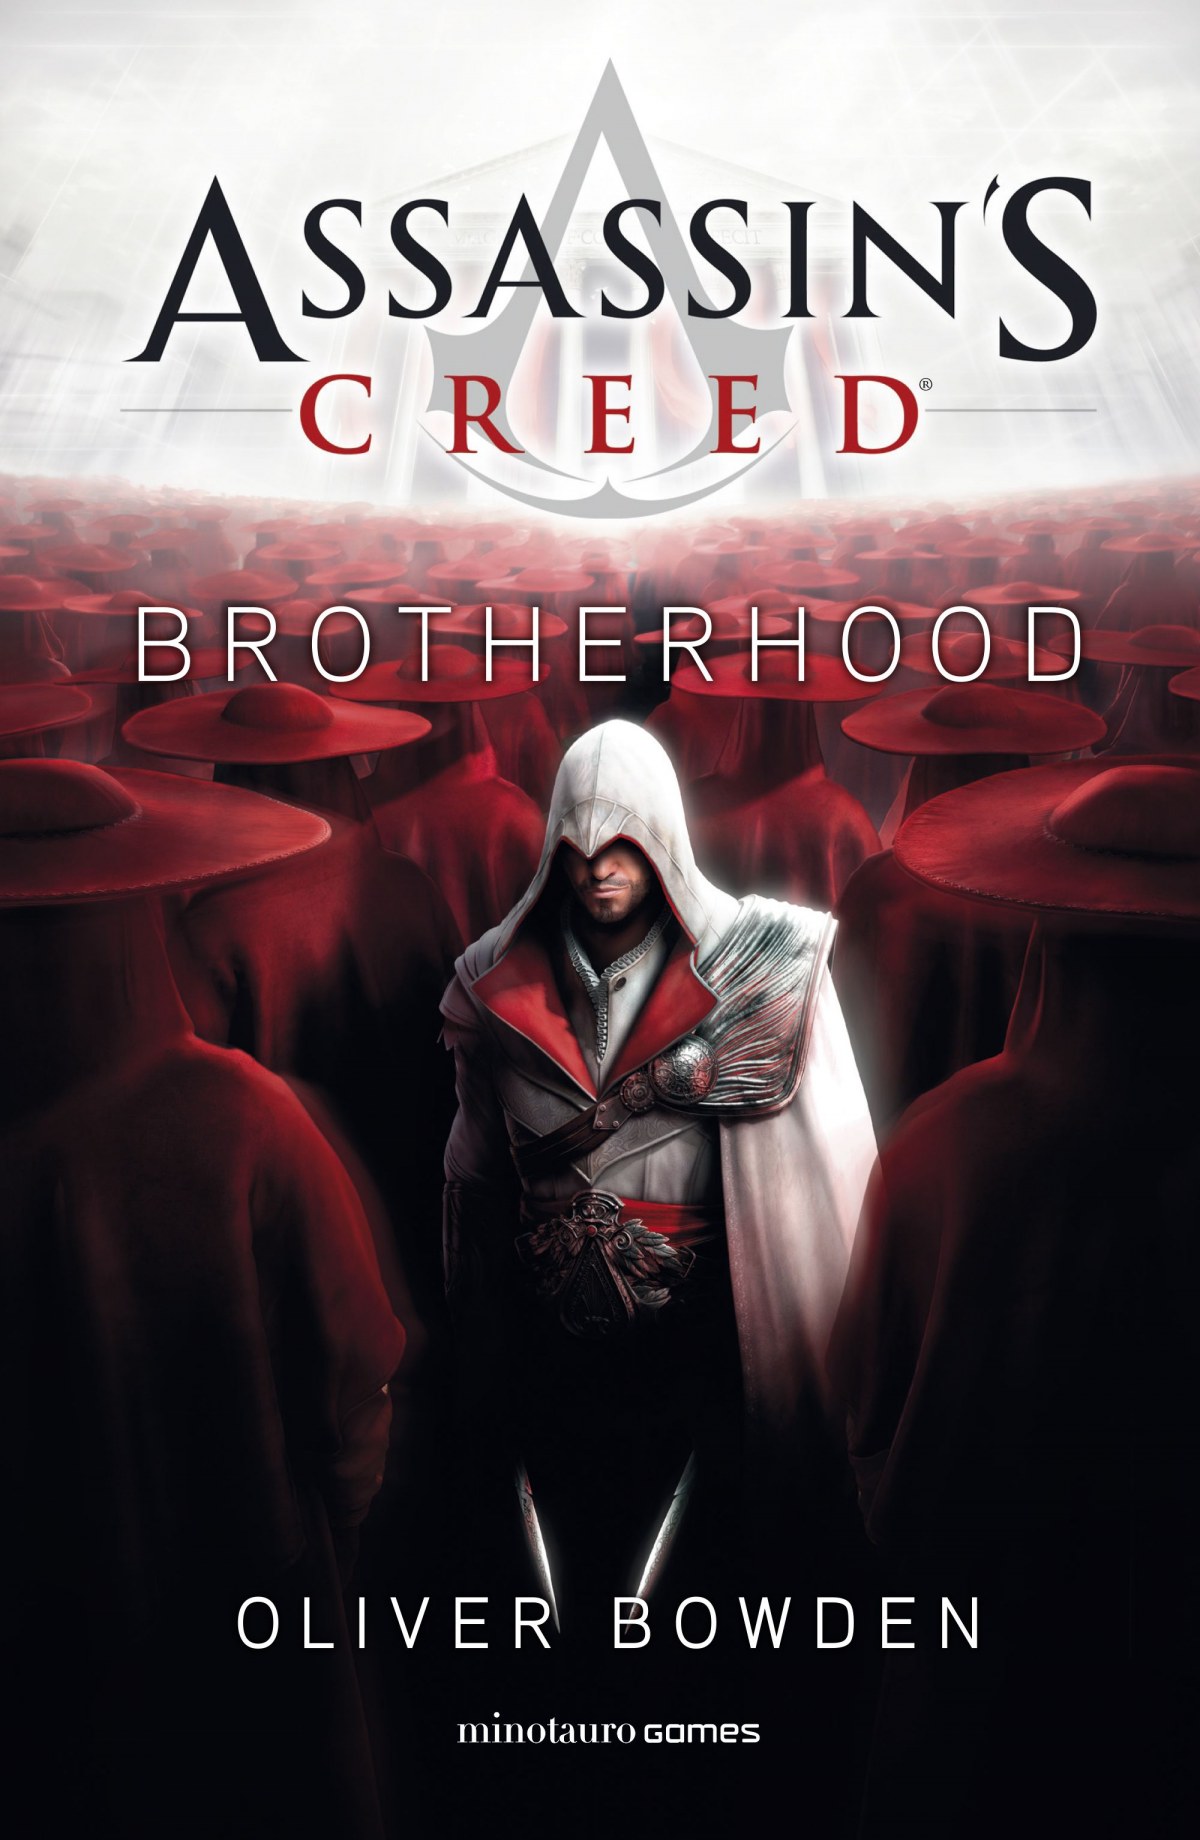 BROTHERHOOD Assassin's Creed 4 - Bowden, Oliver